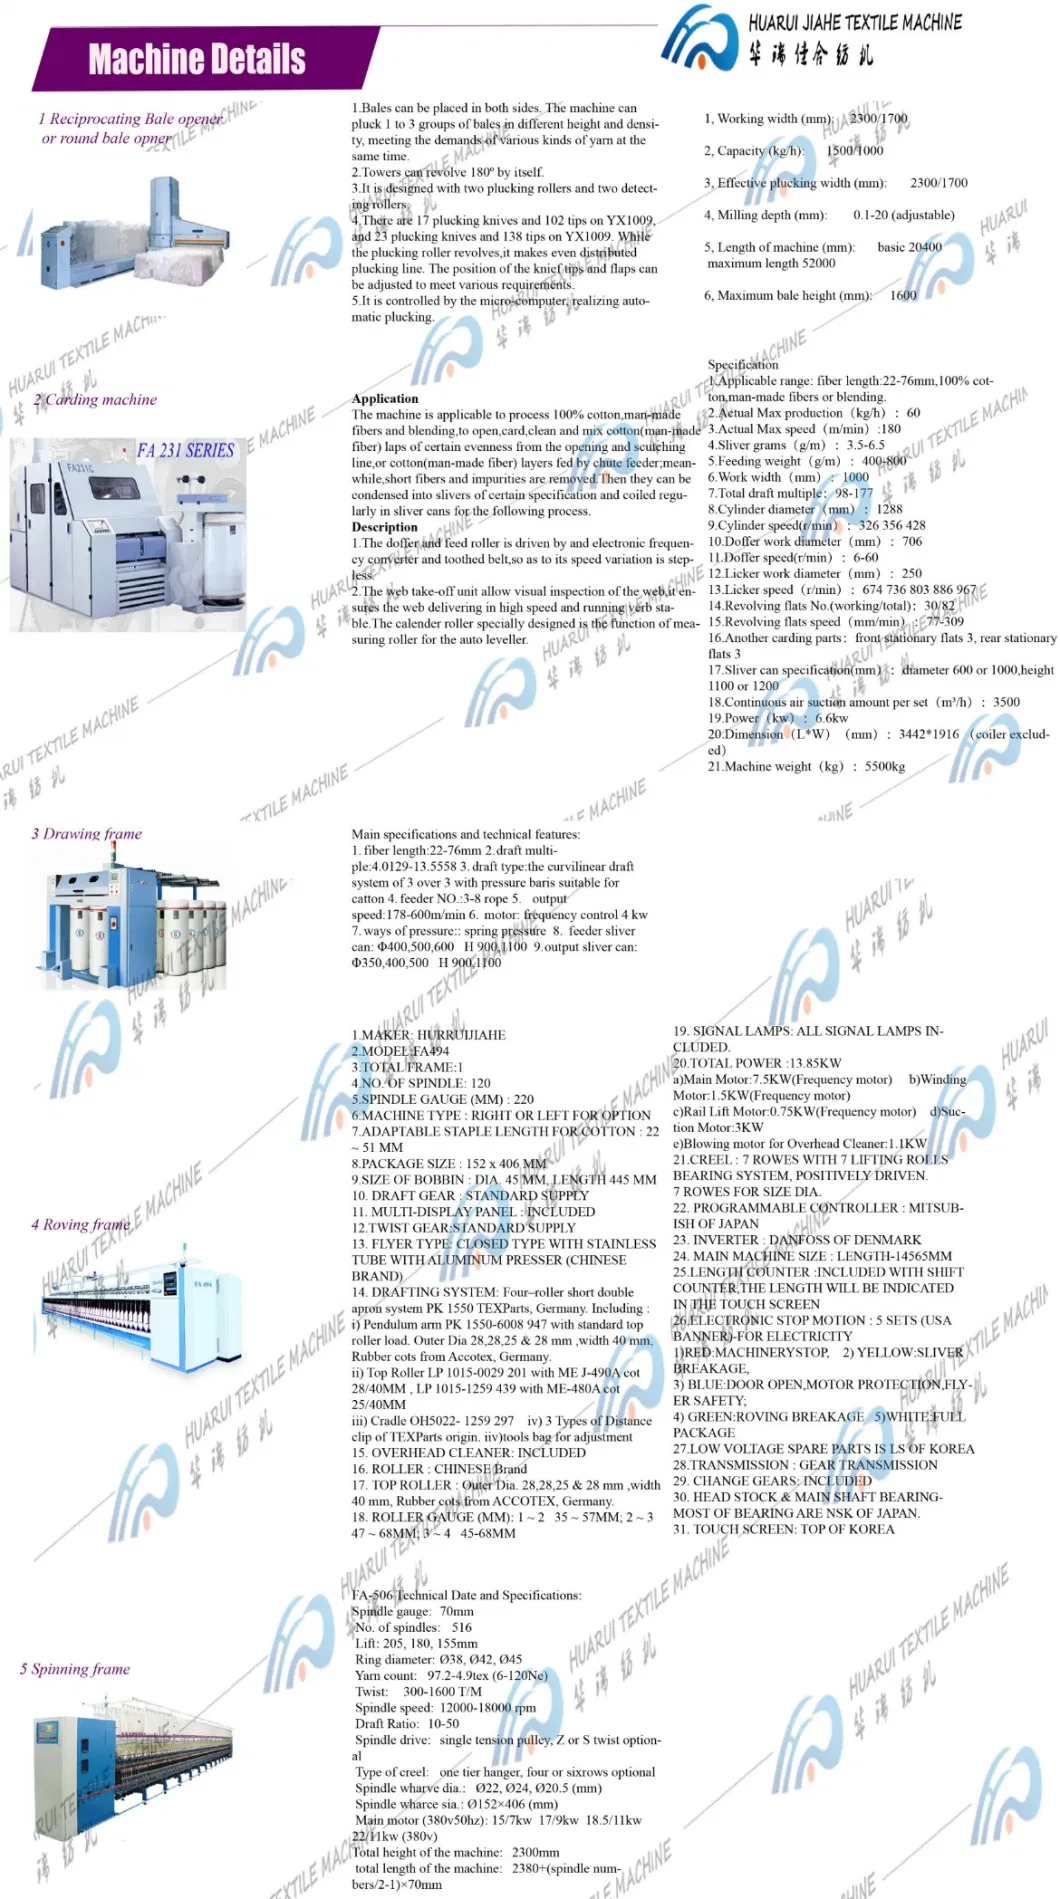 Roll Dyeing Machine Price Discount Mainly Used for The Dyeing of Cotton, Acrylic, Polyester/Cotton, Polyester, Silk, Spandex and Other Fabrics